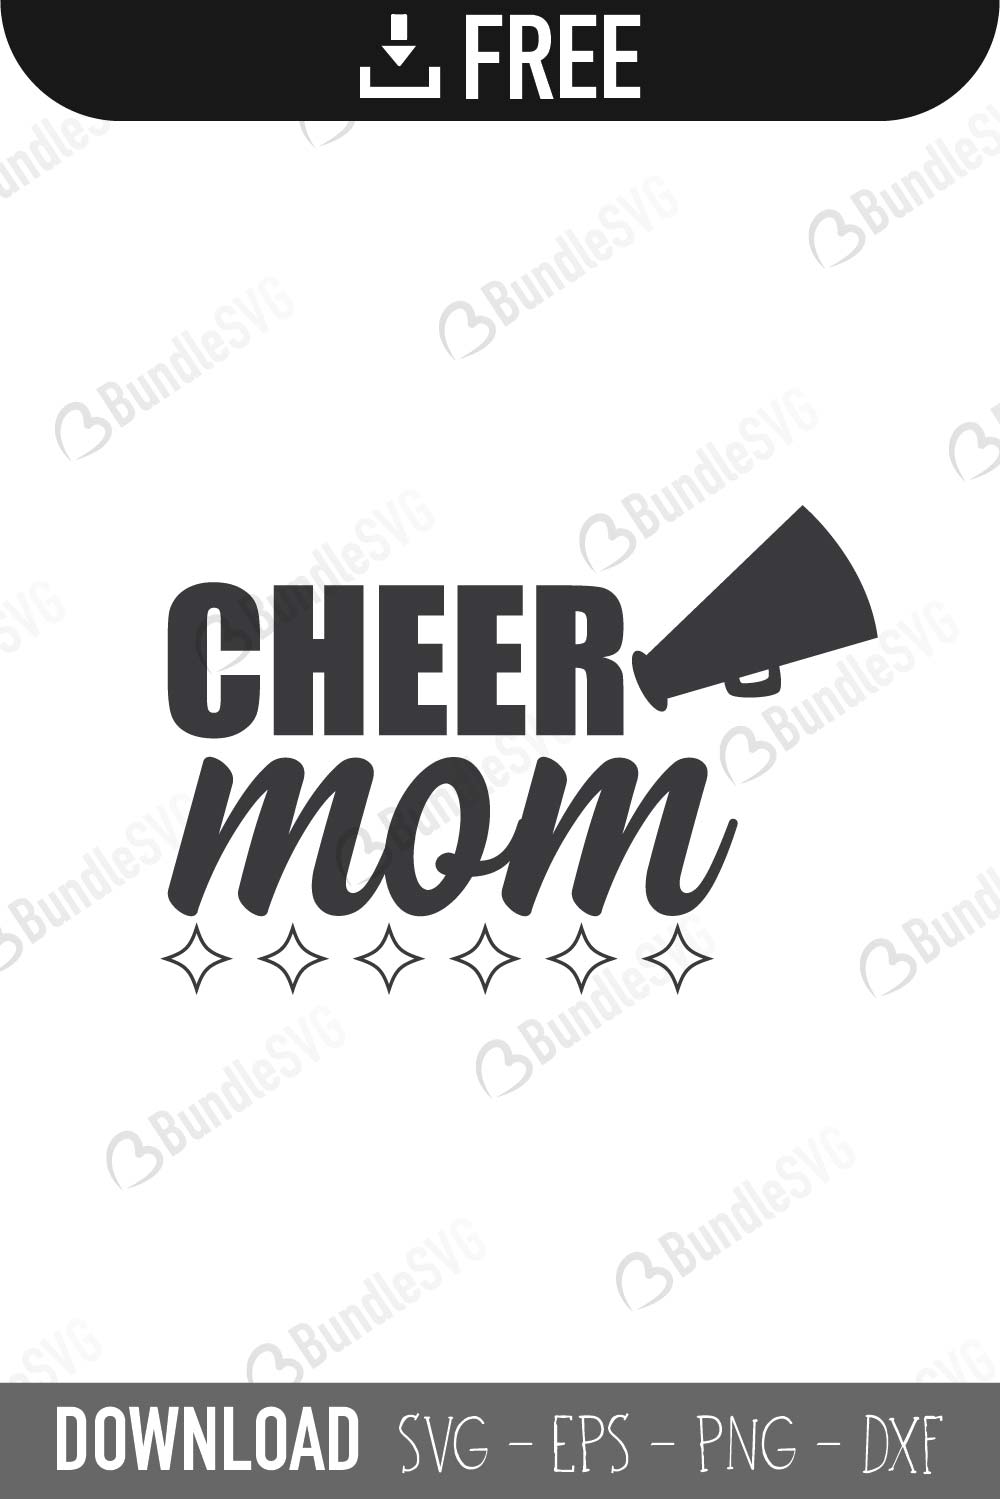 Download 48 Free Boy Mom Svg Png Free Svg Files Silhouette And Cricut Cutting Files